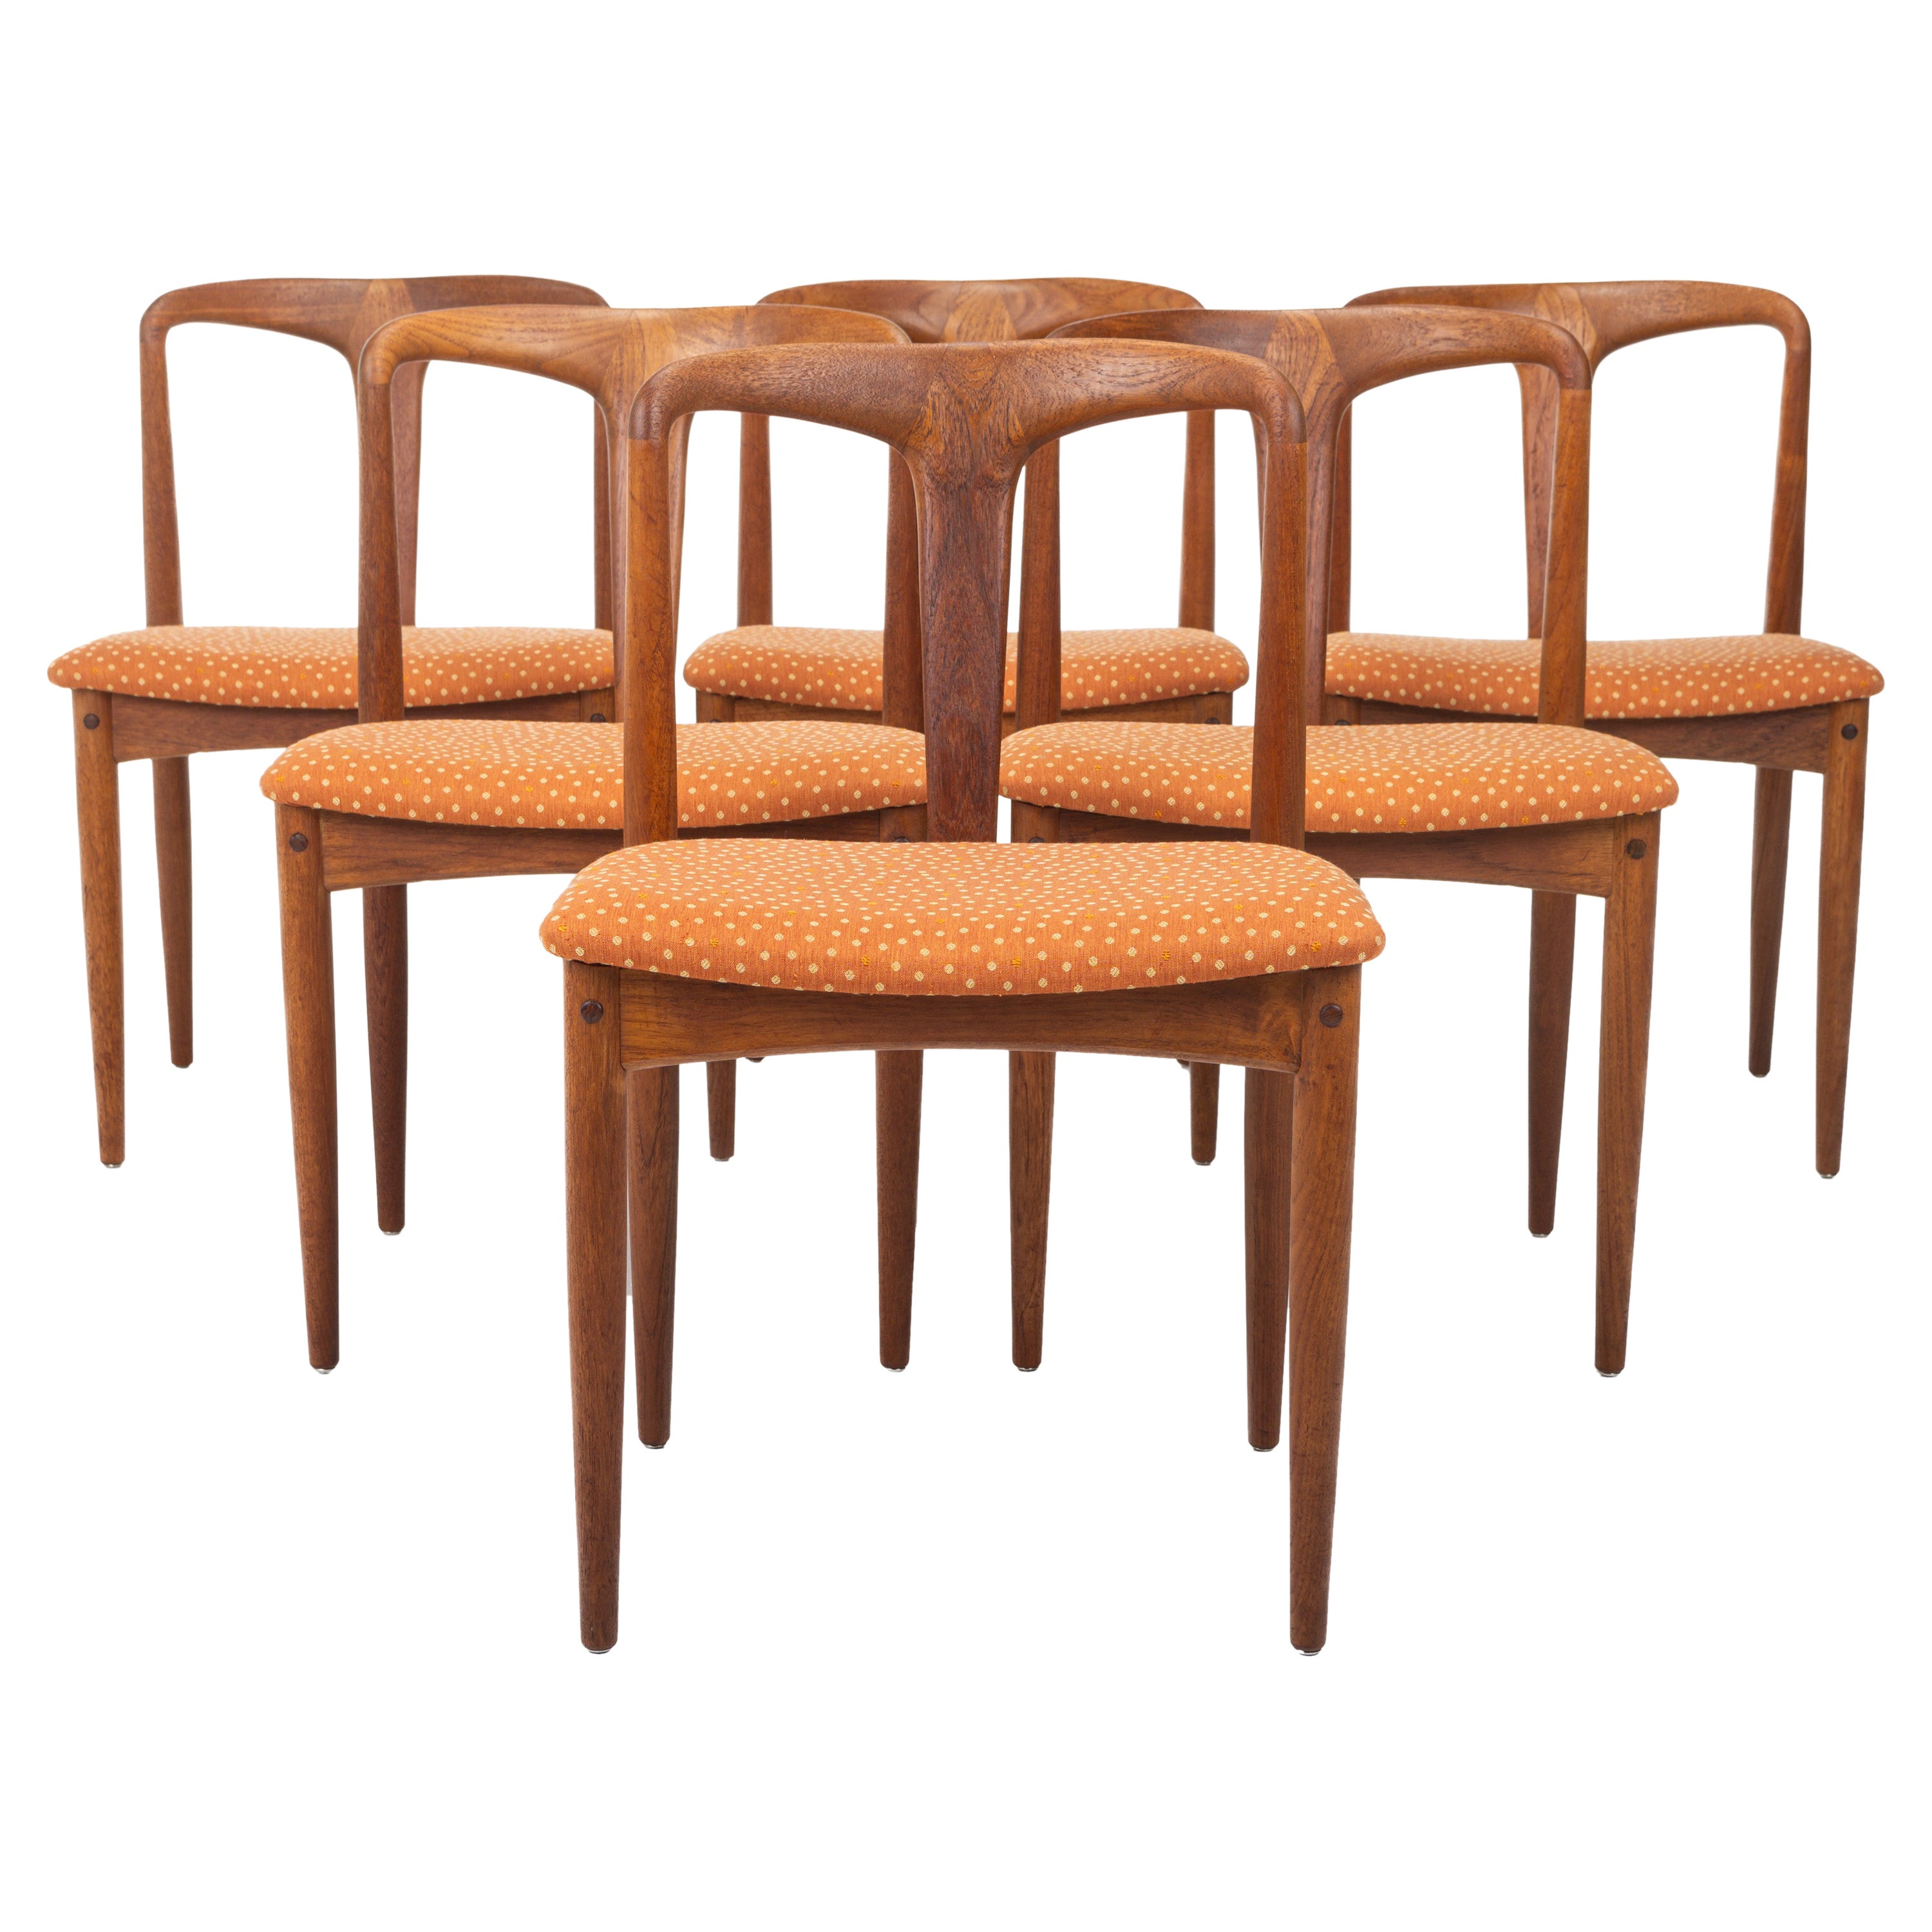 Set of 6 dining chairs by Johannes Andersen for Uldum Møbelfabrik in Denmark 196 For Sale